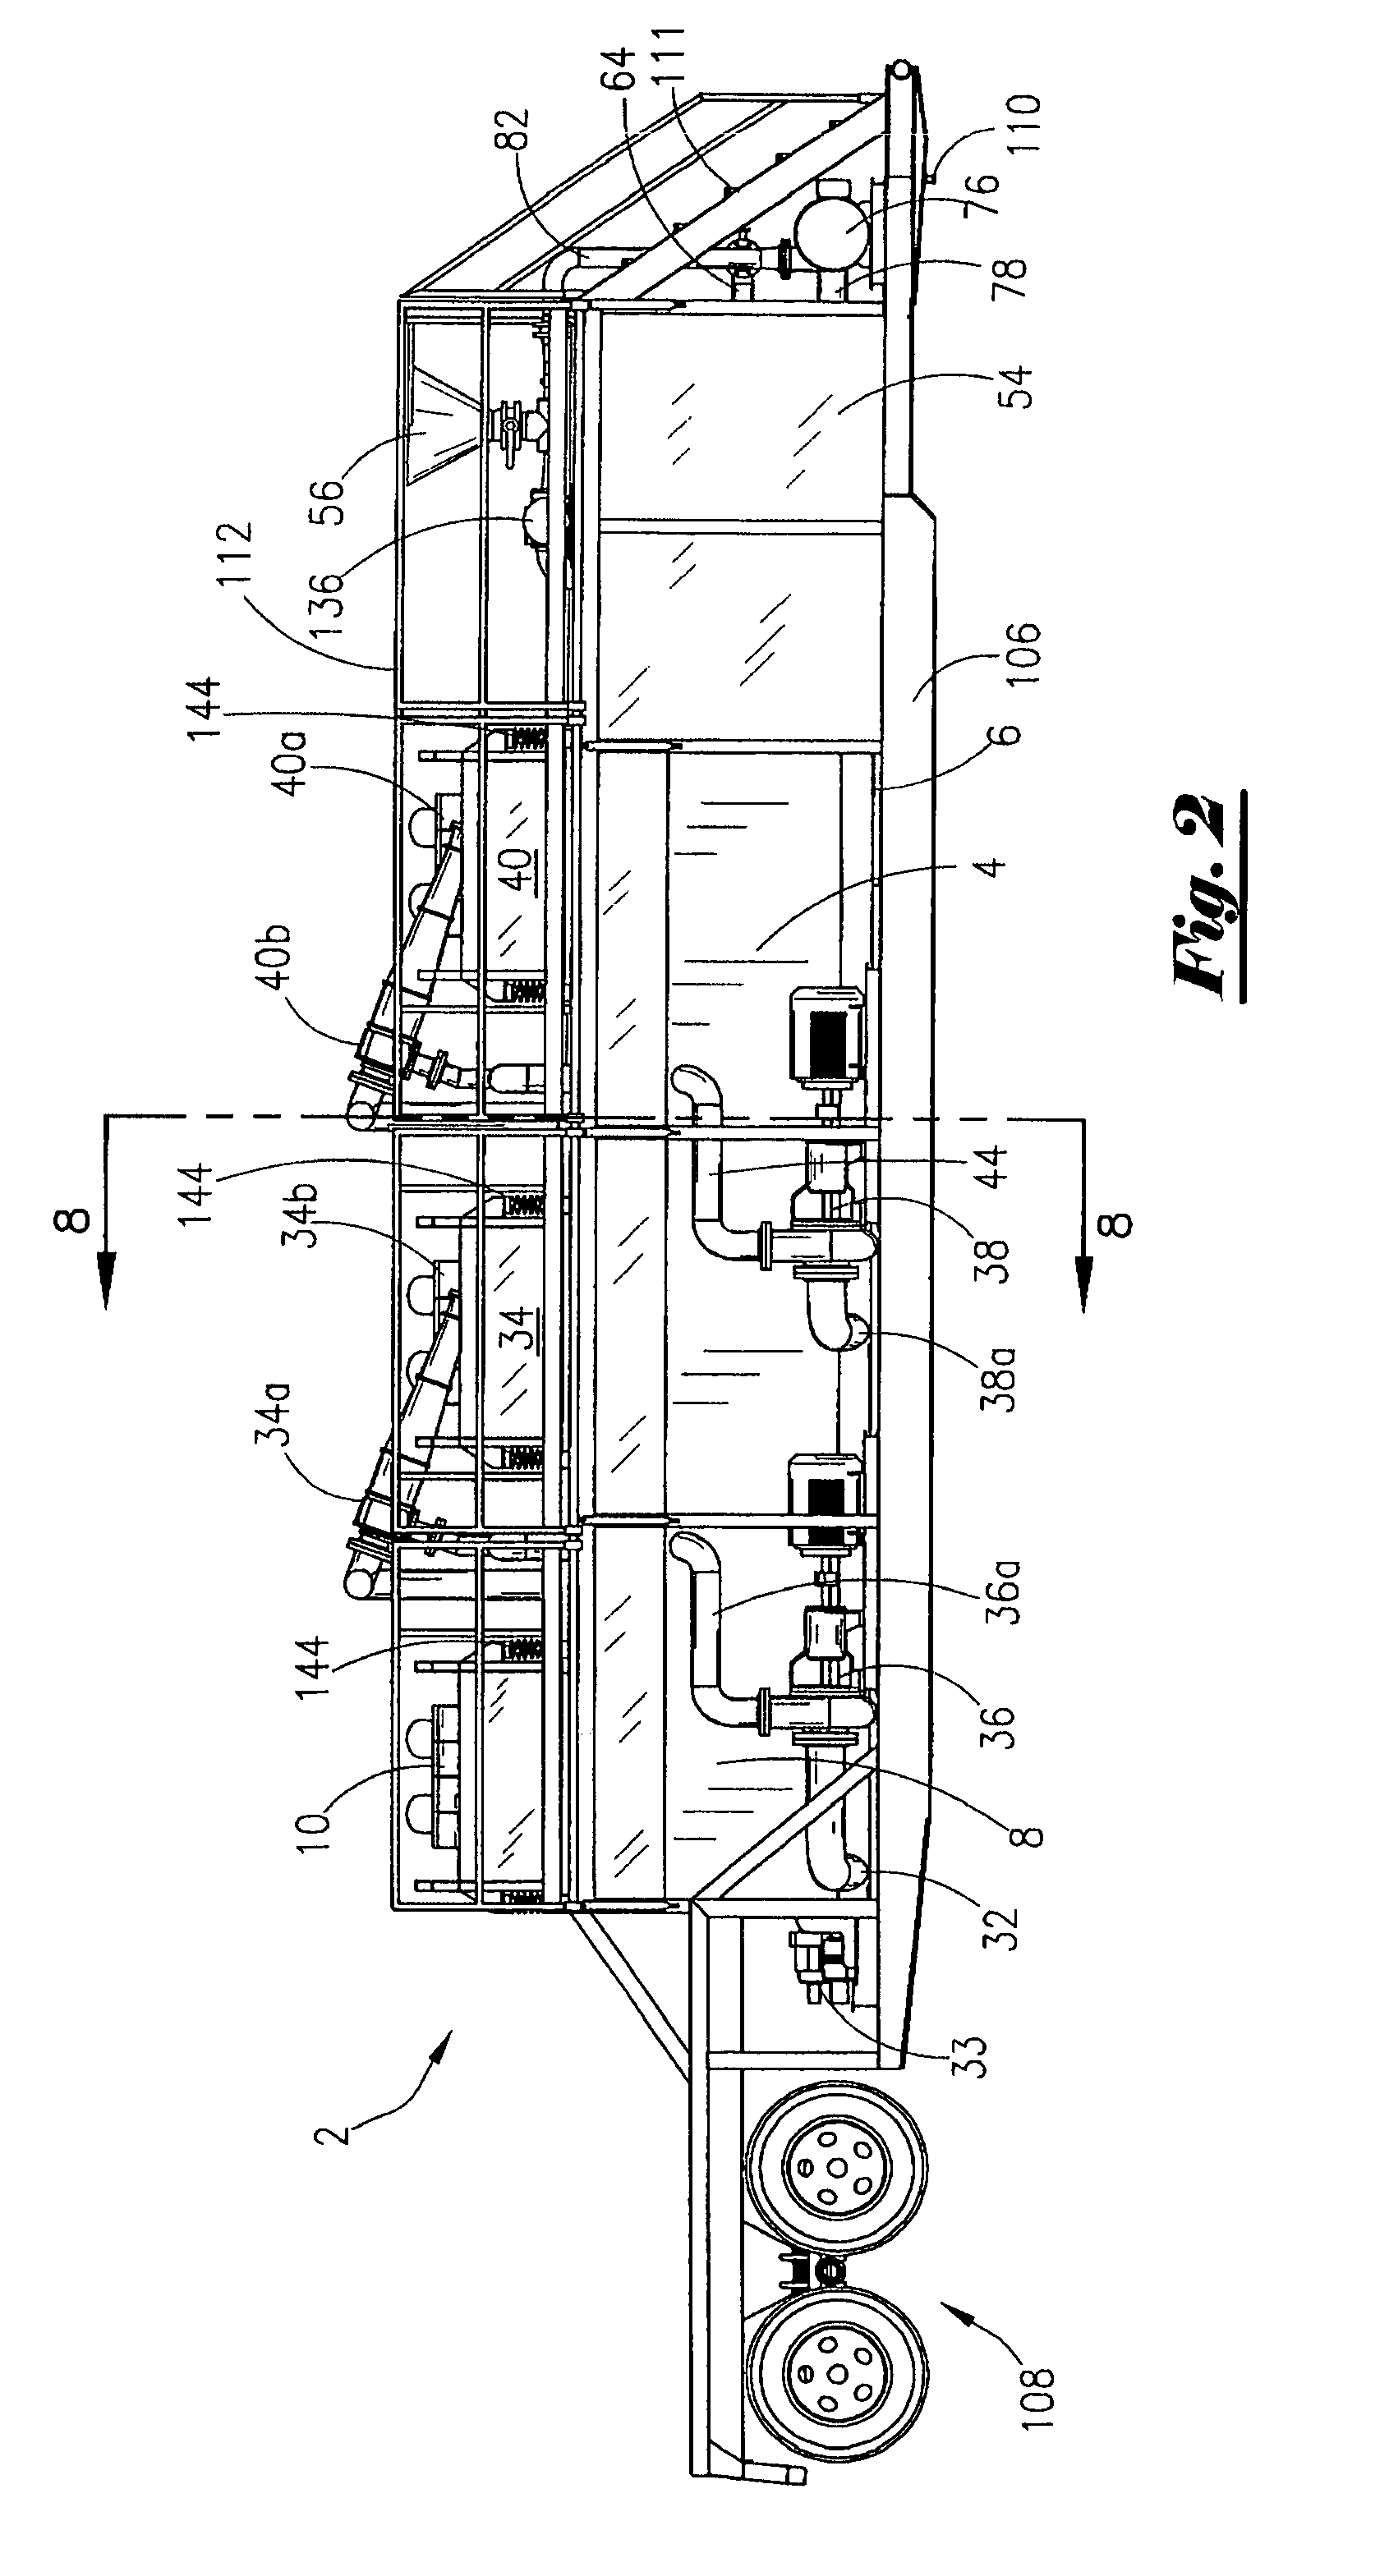 System for separating solids from a fluid stream